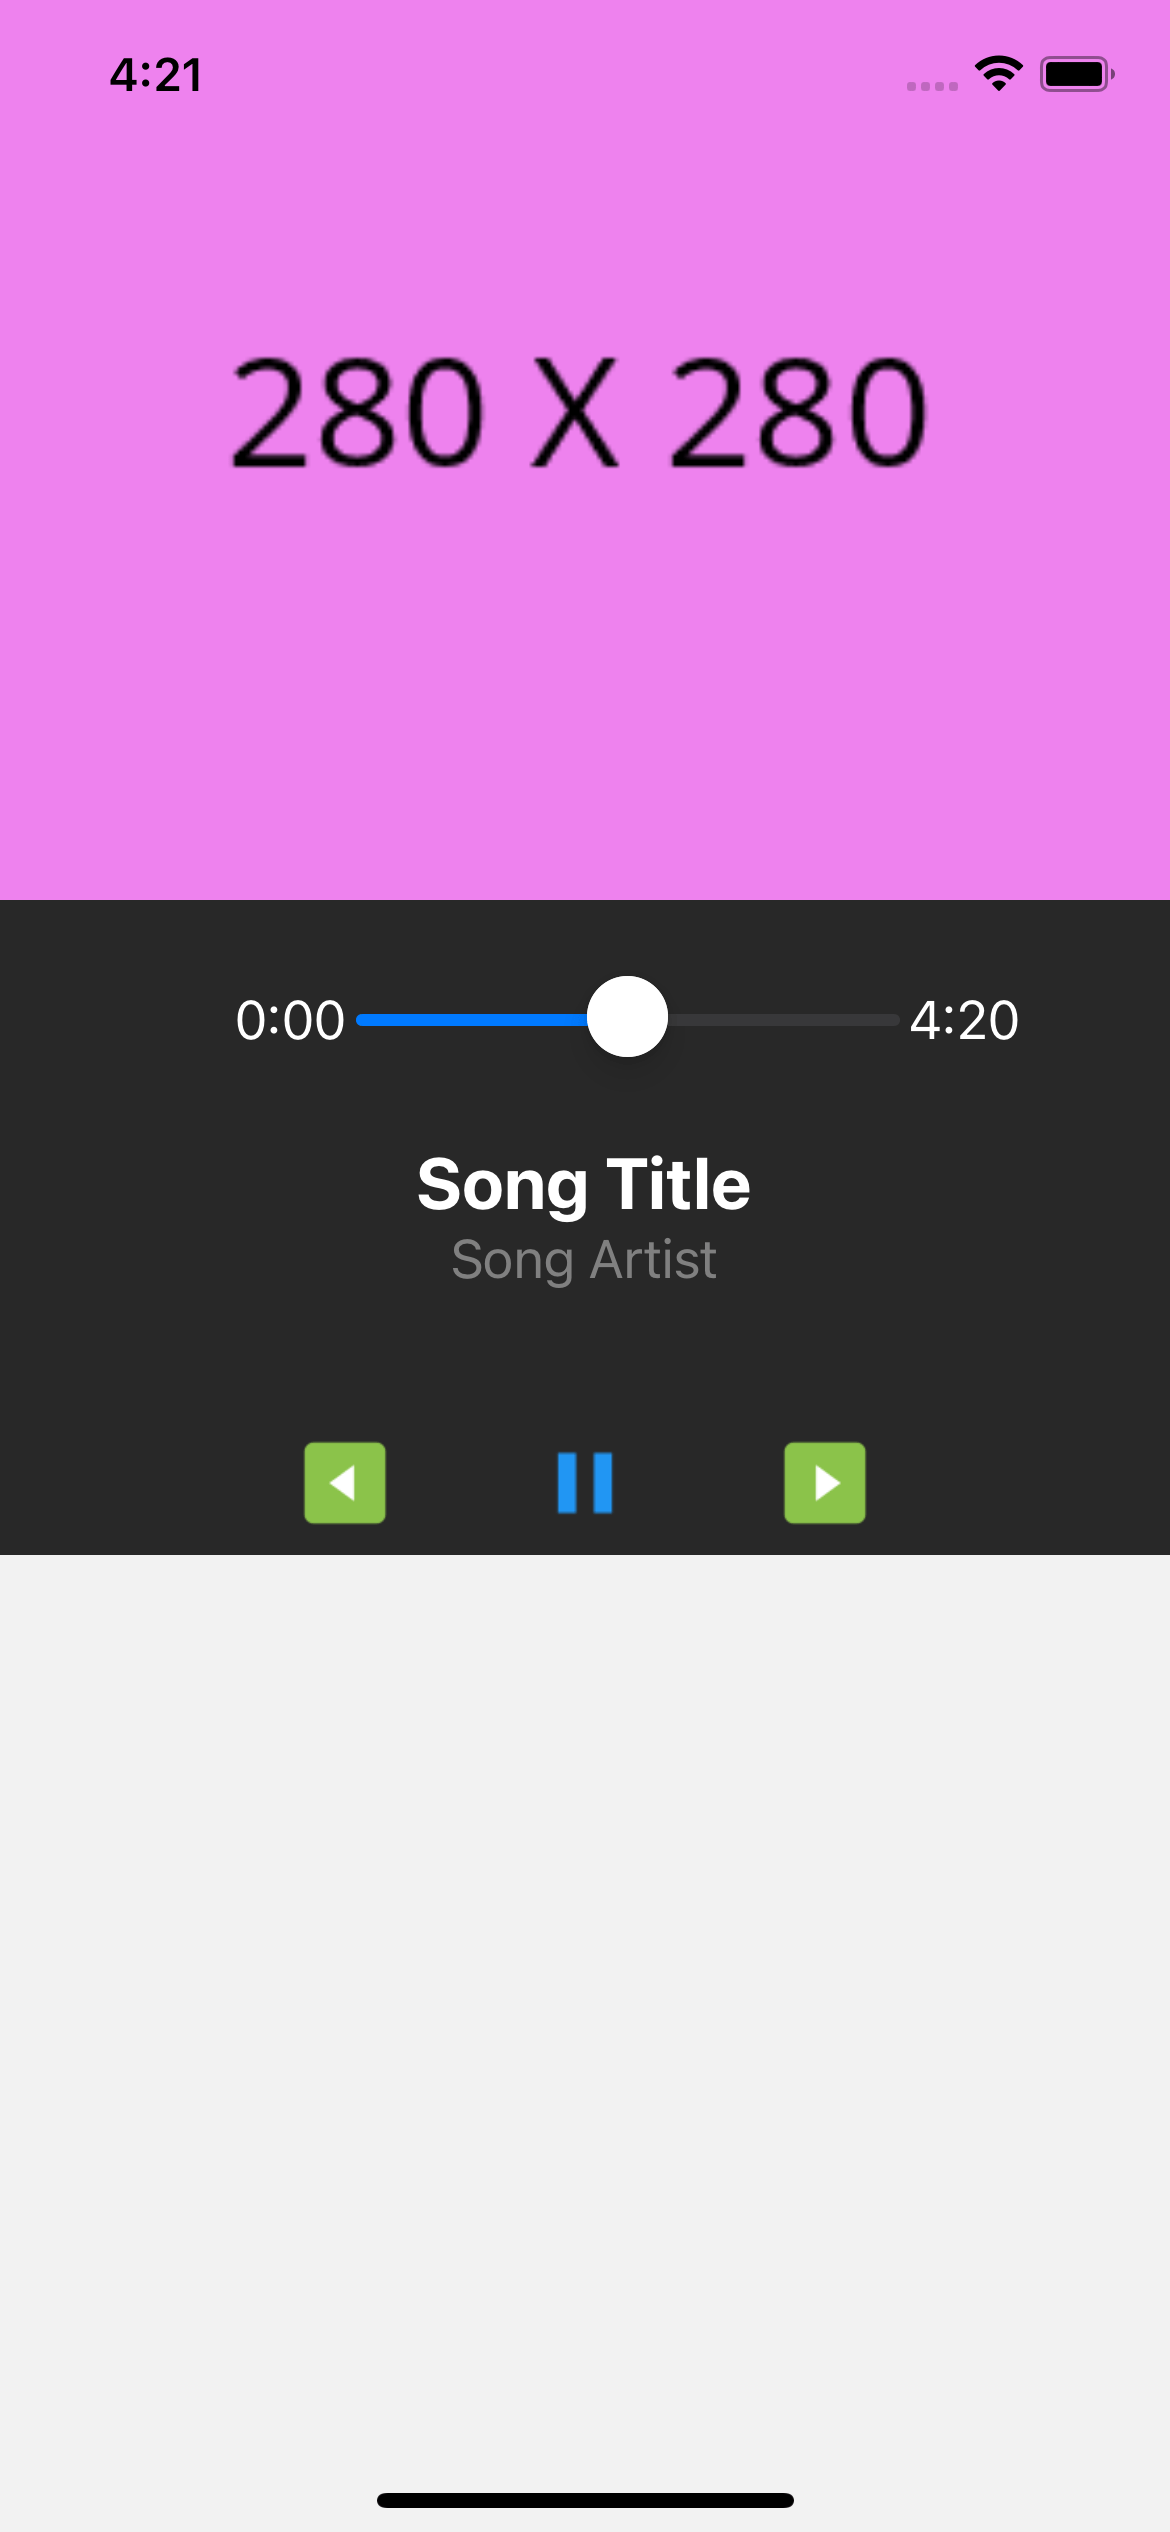 React native template. Music player